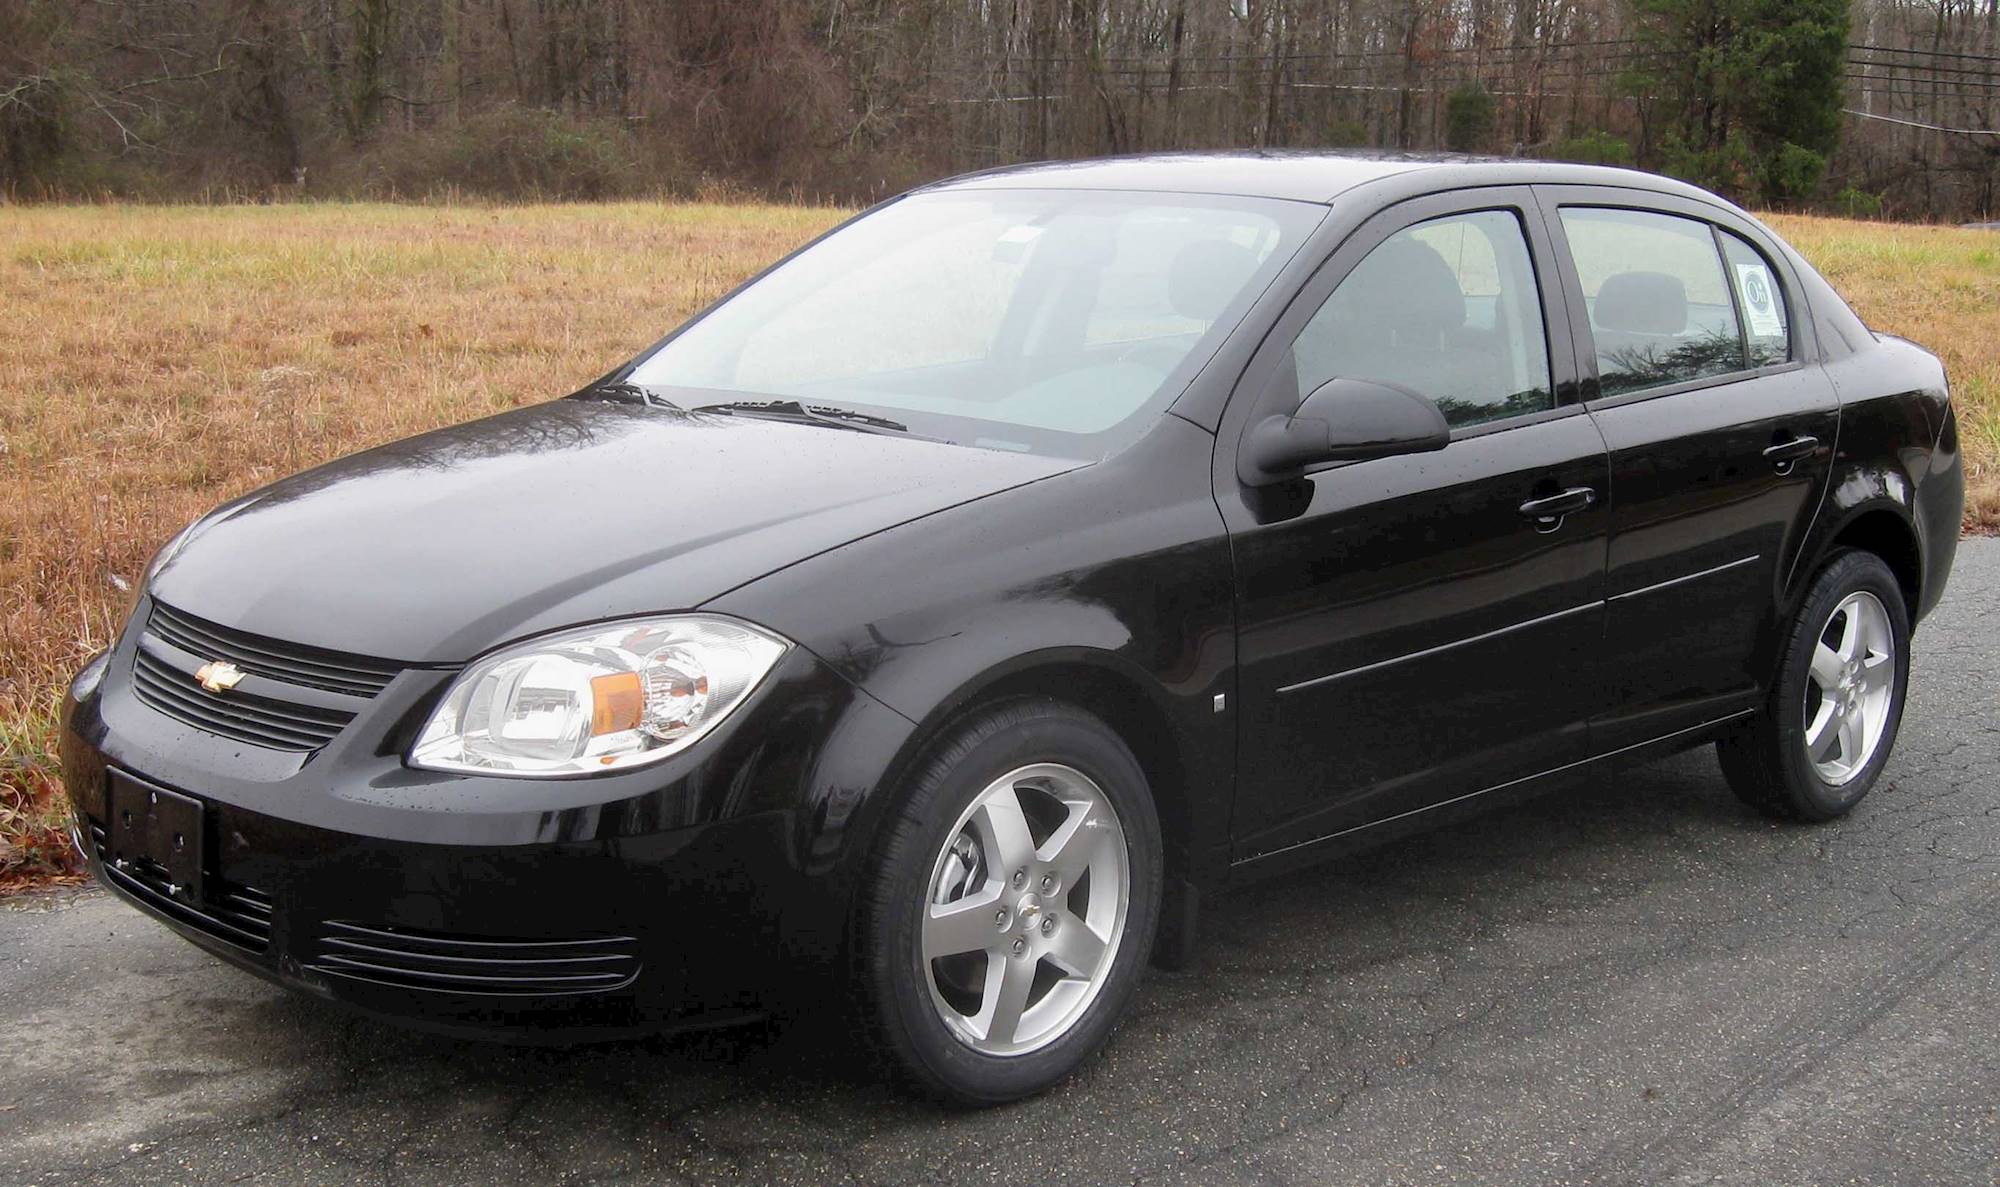 2009 Chevrolet Cobalt SS - Coupe 2.0L Turbo Manual